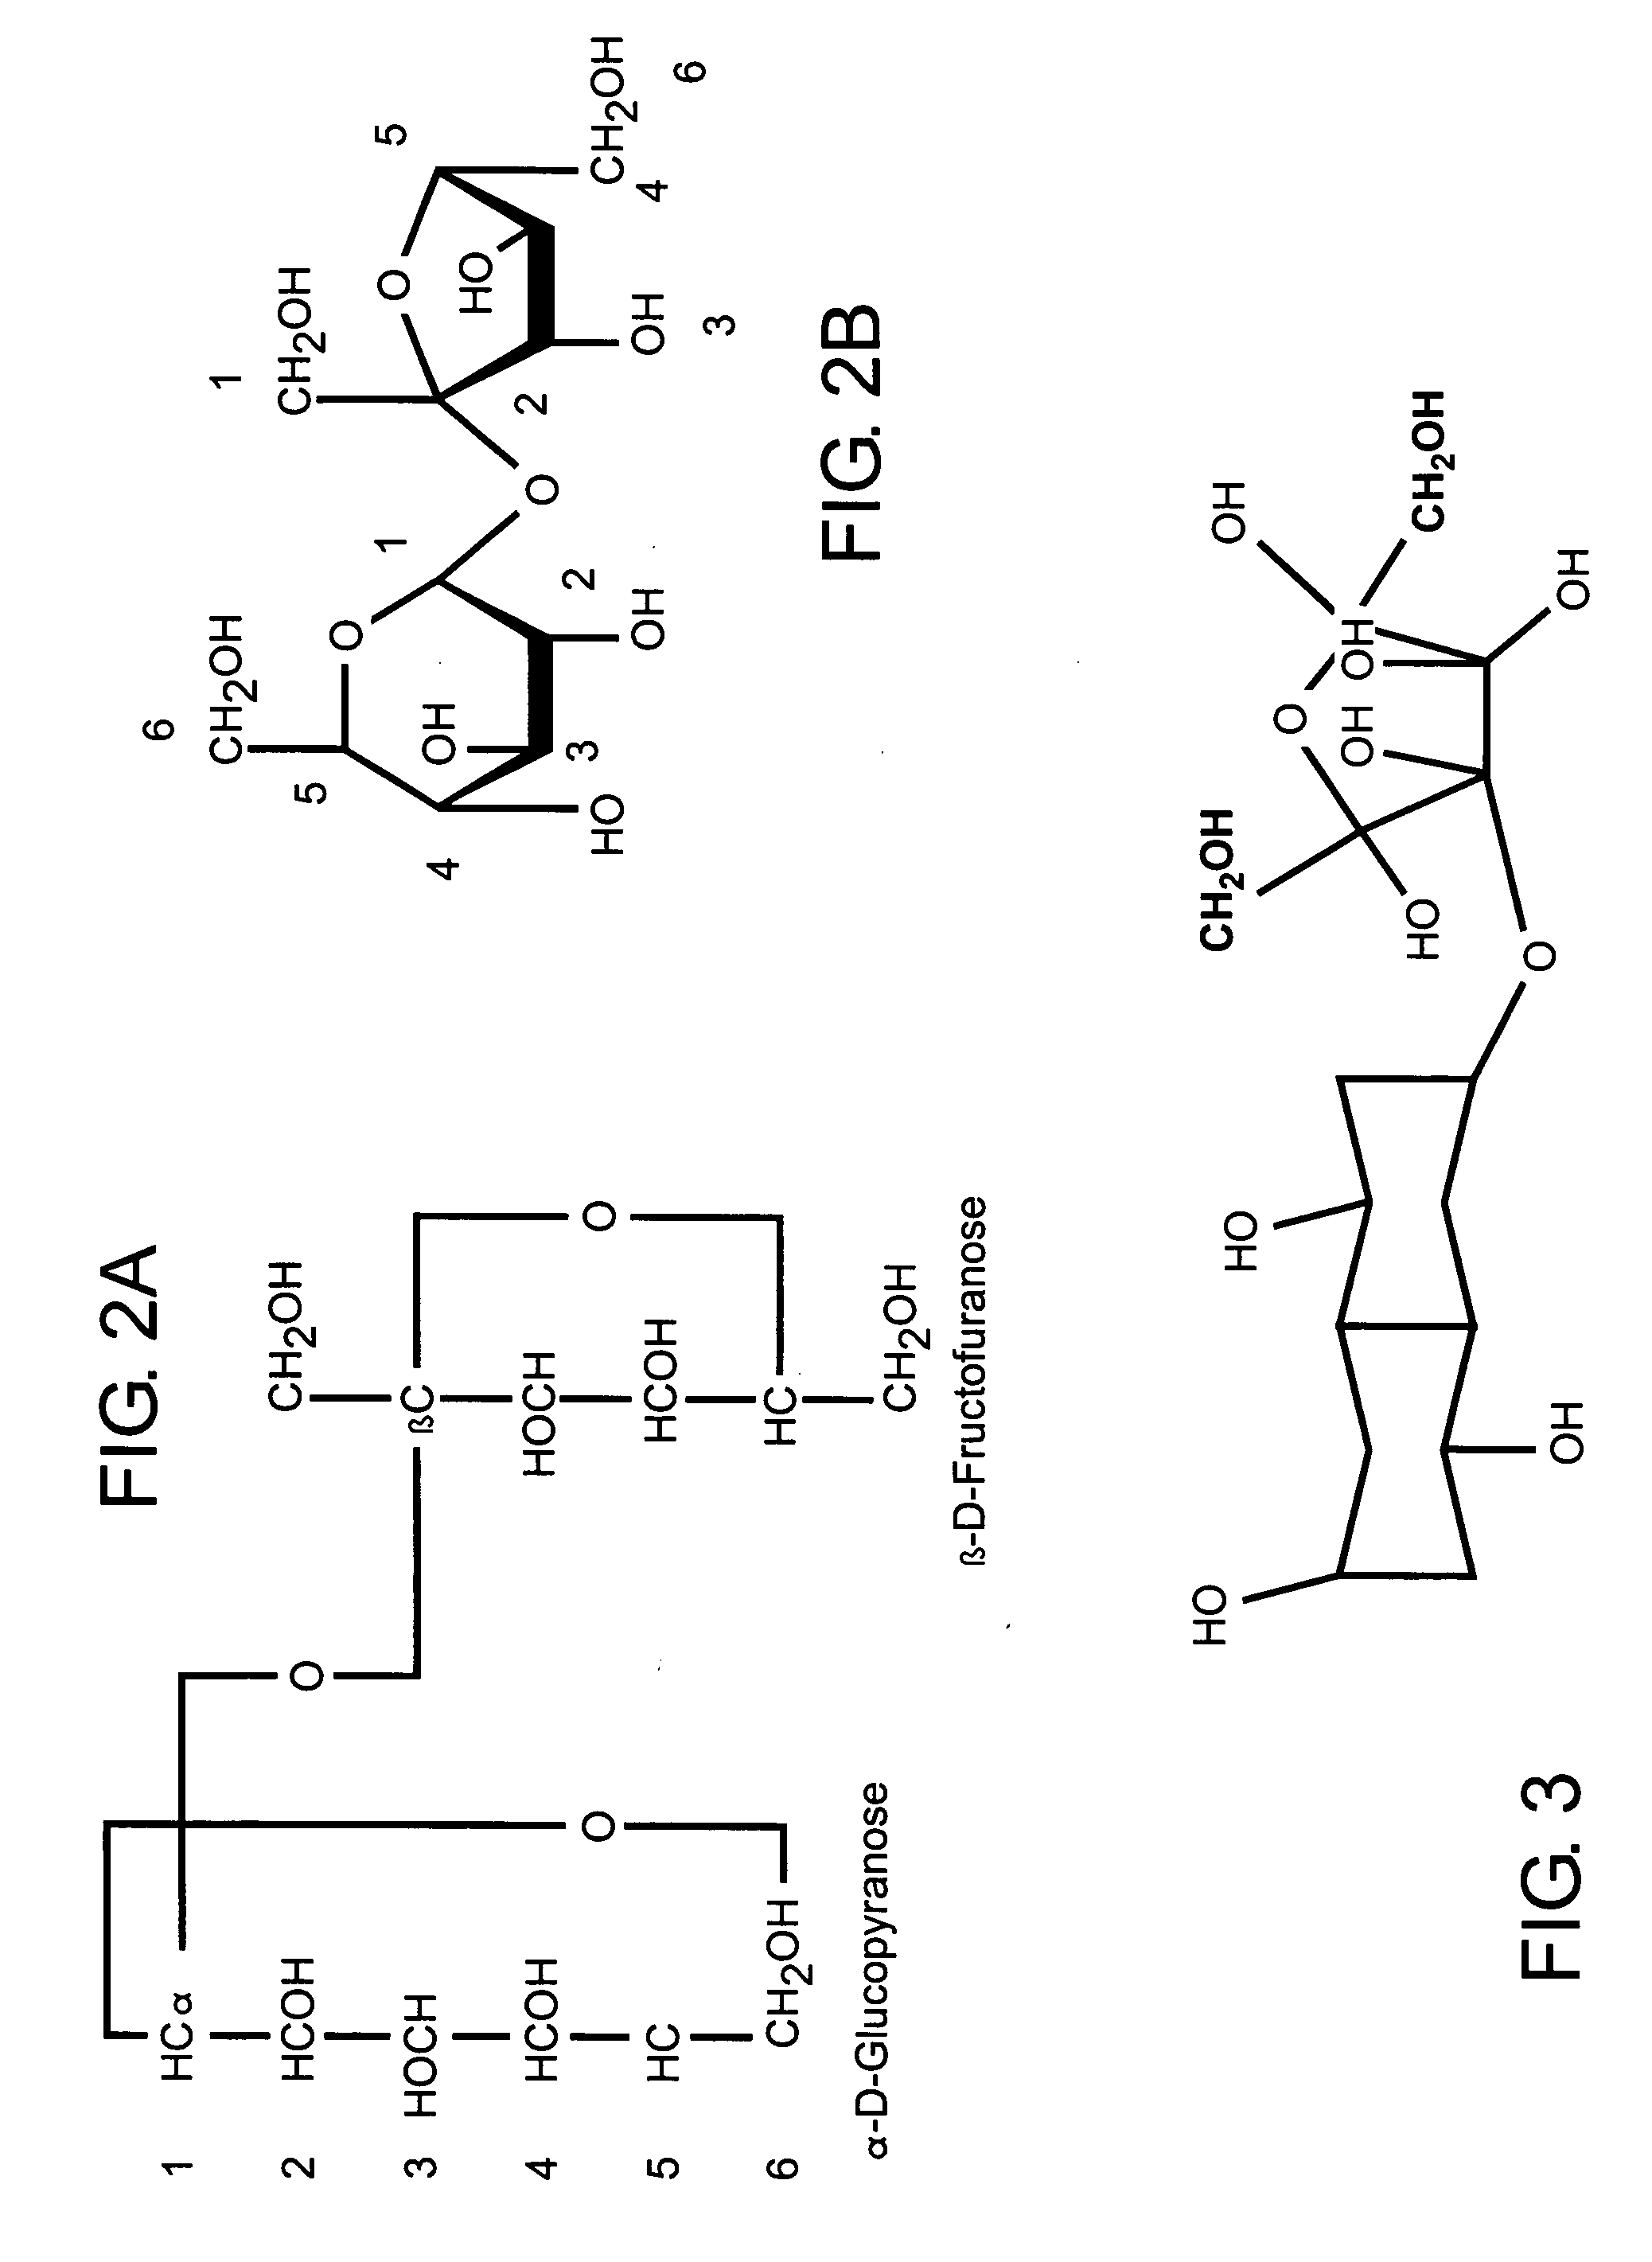 Polysaccharide sweetener compounds, process for manufacture, and method of selecting components for polysaccharide sweetener compounds based on user specific sweetener applications